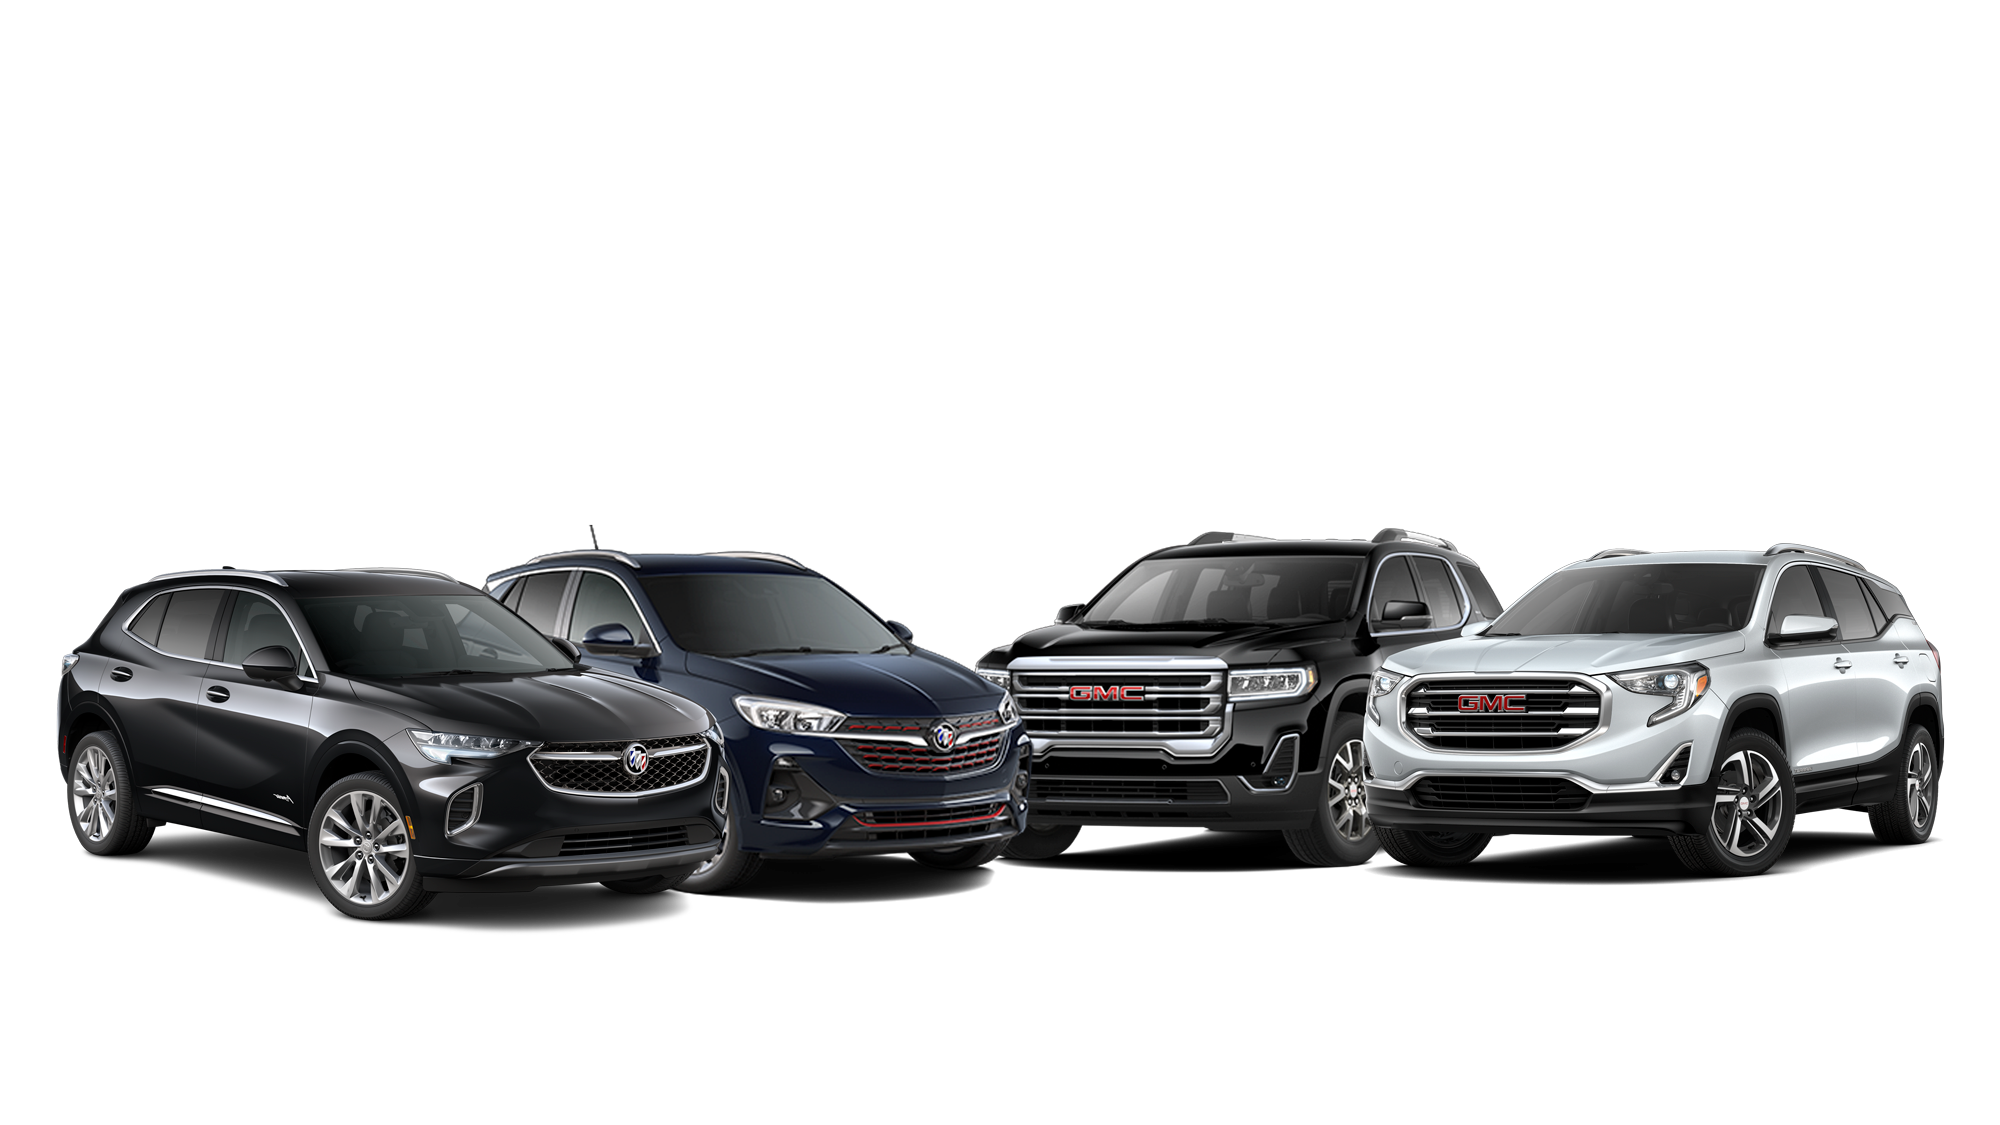 Certified Pre-Owned SUVs at Don Moore Automotive in Owensboro, KY